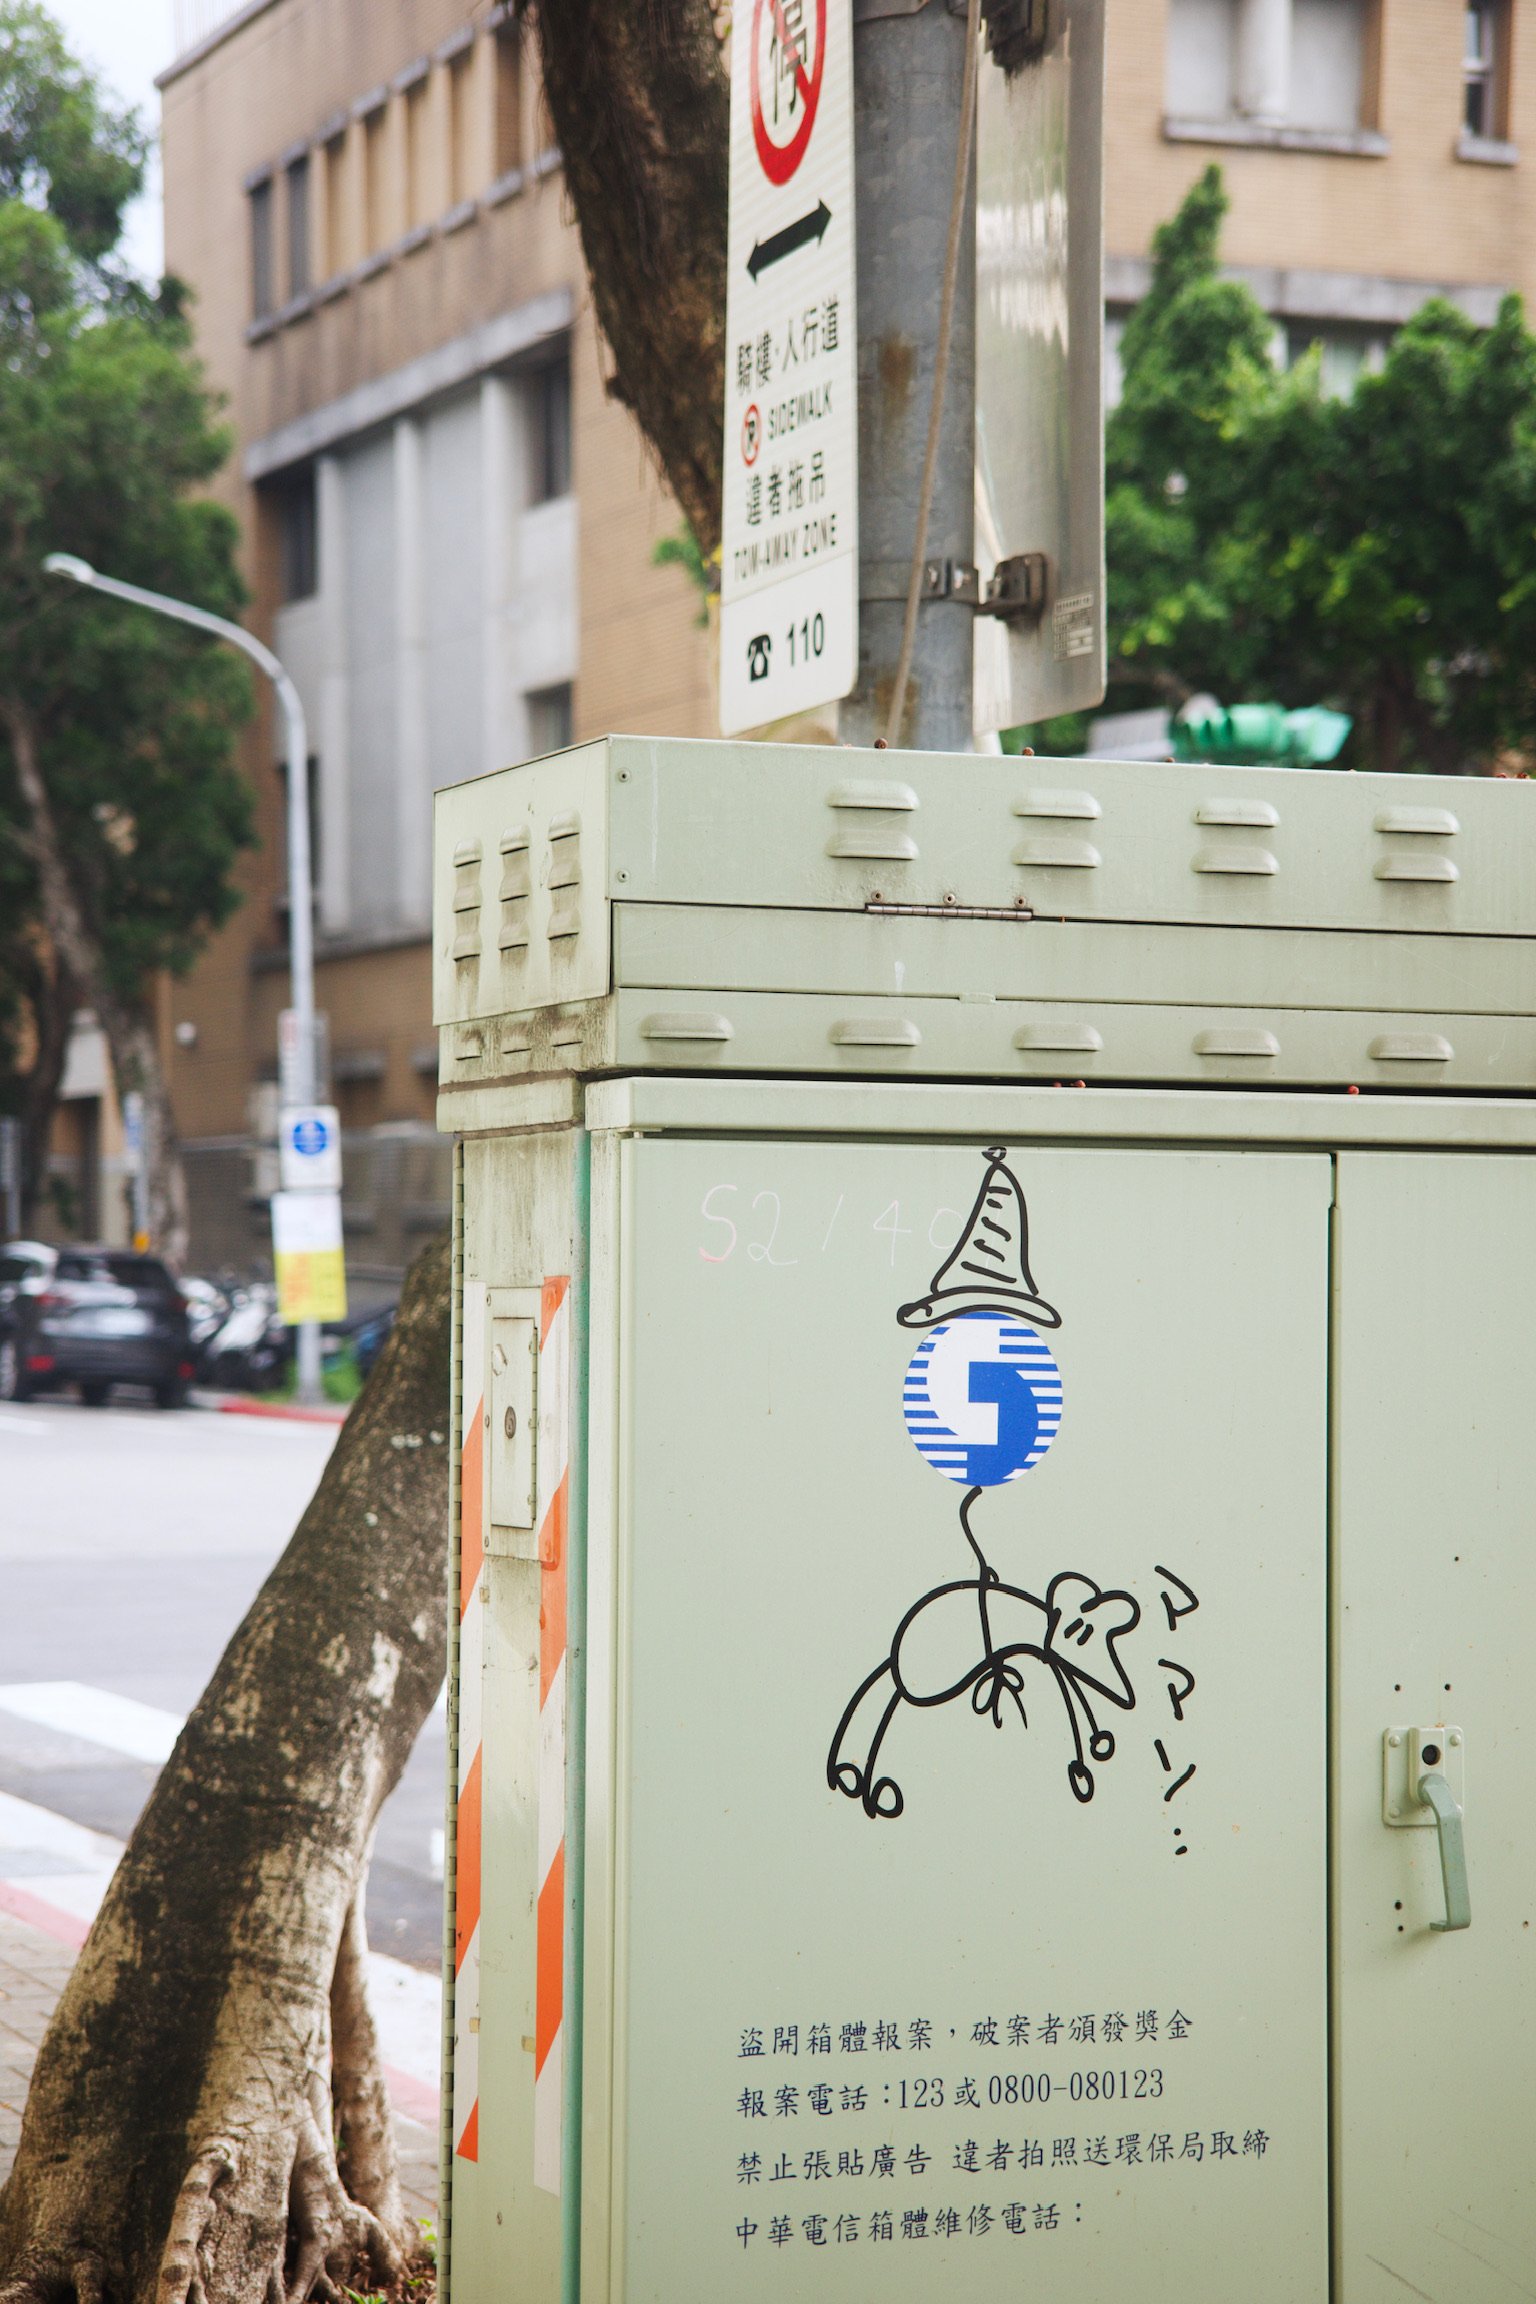 Graffiti on a electricity box with a mouse being hang by a thread across its body, saying ママン.